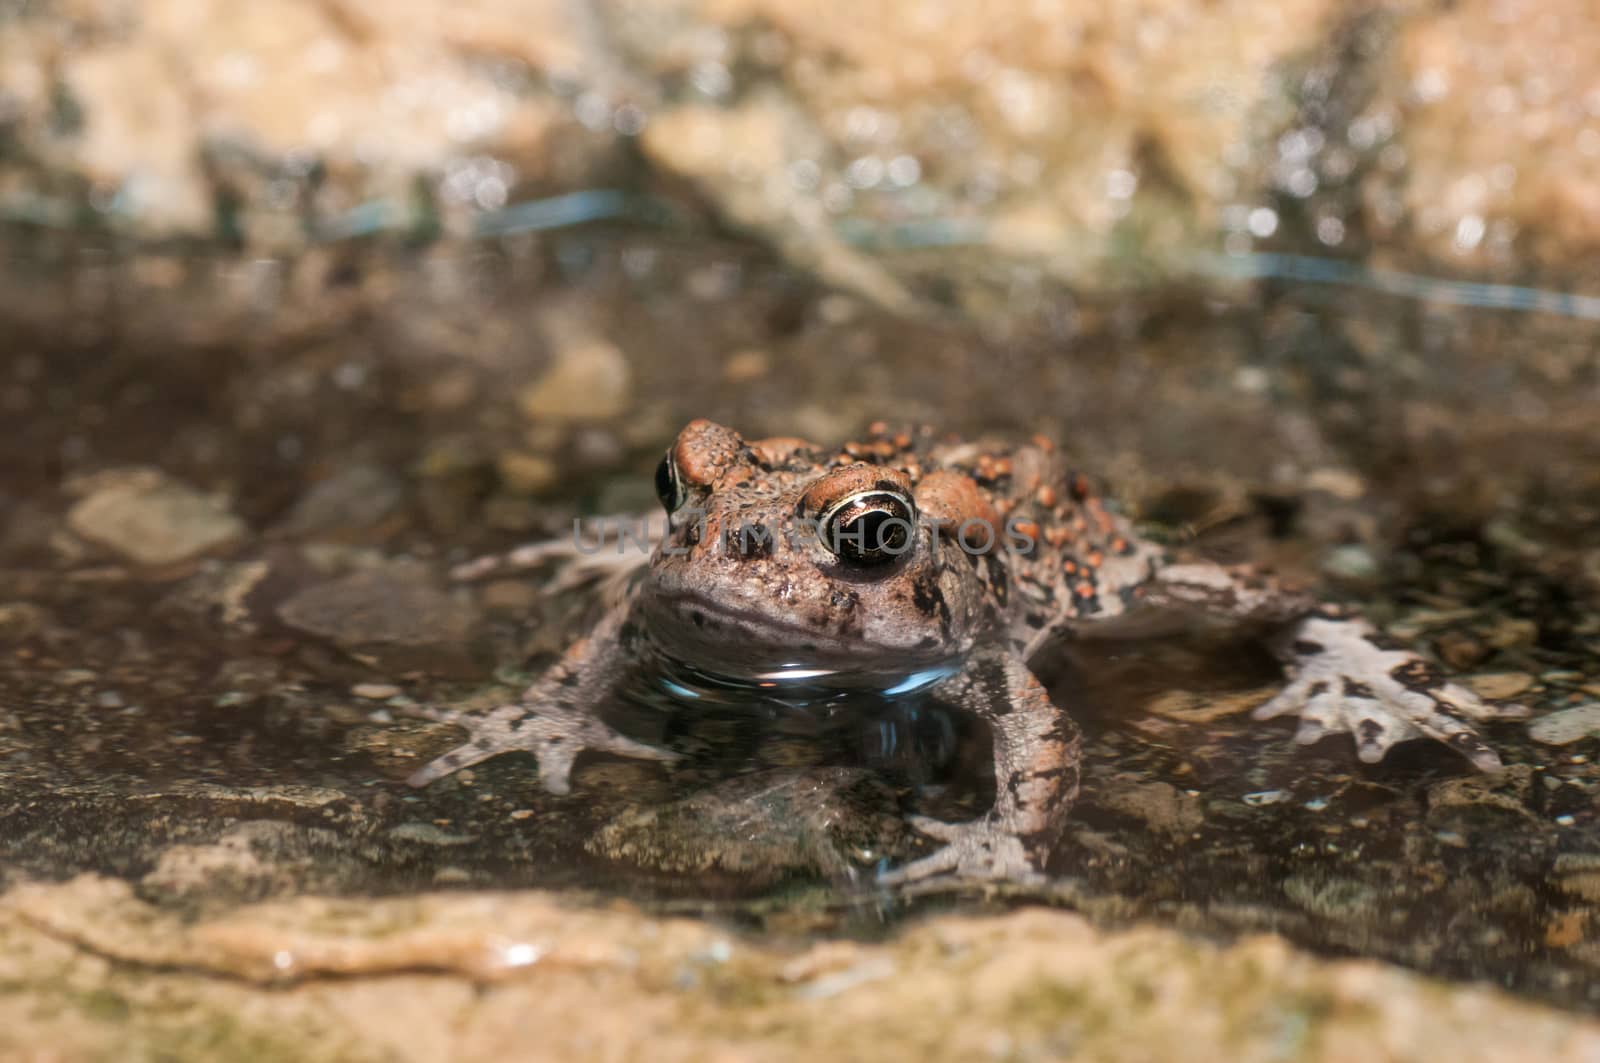 Brown frog with large eyes sitting in the calm water